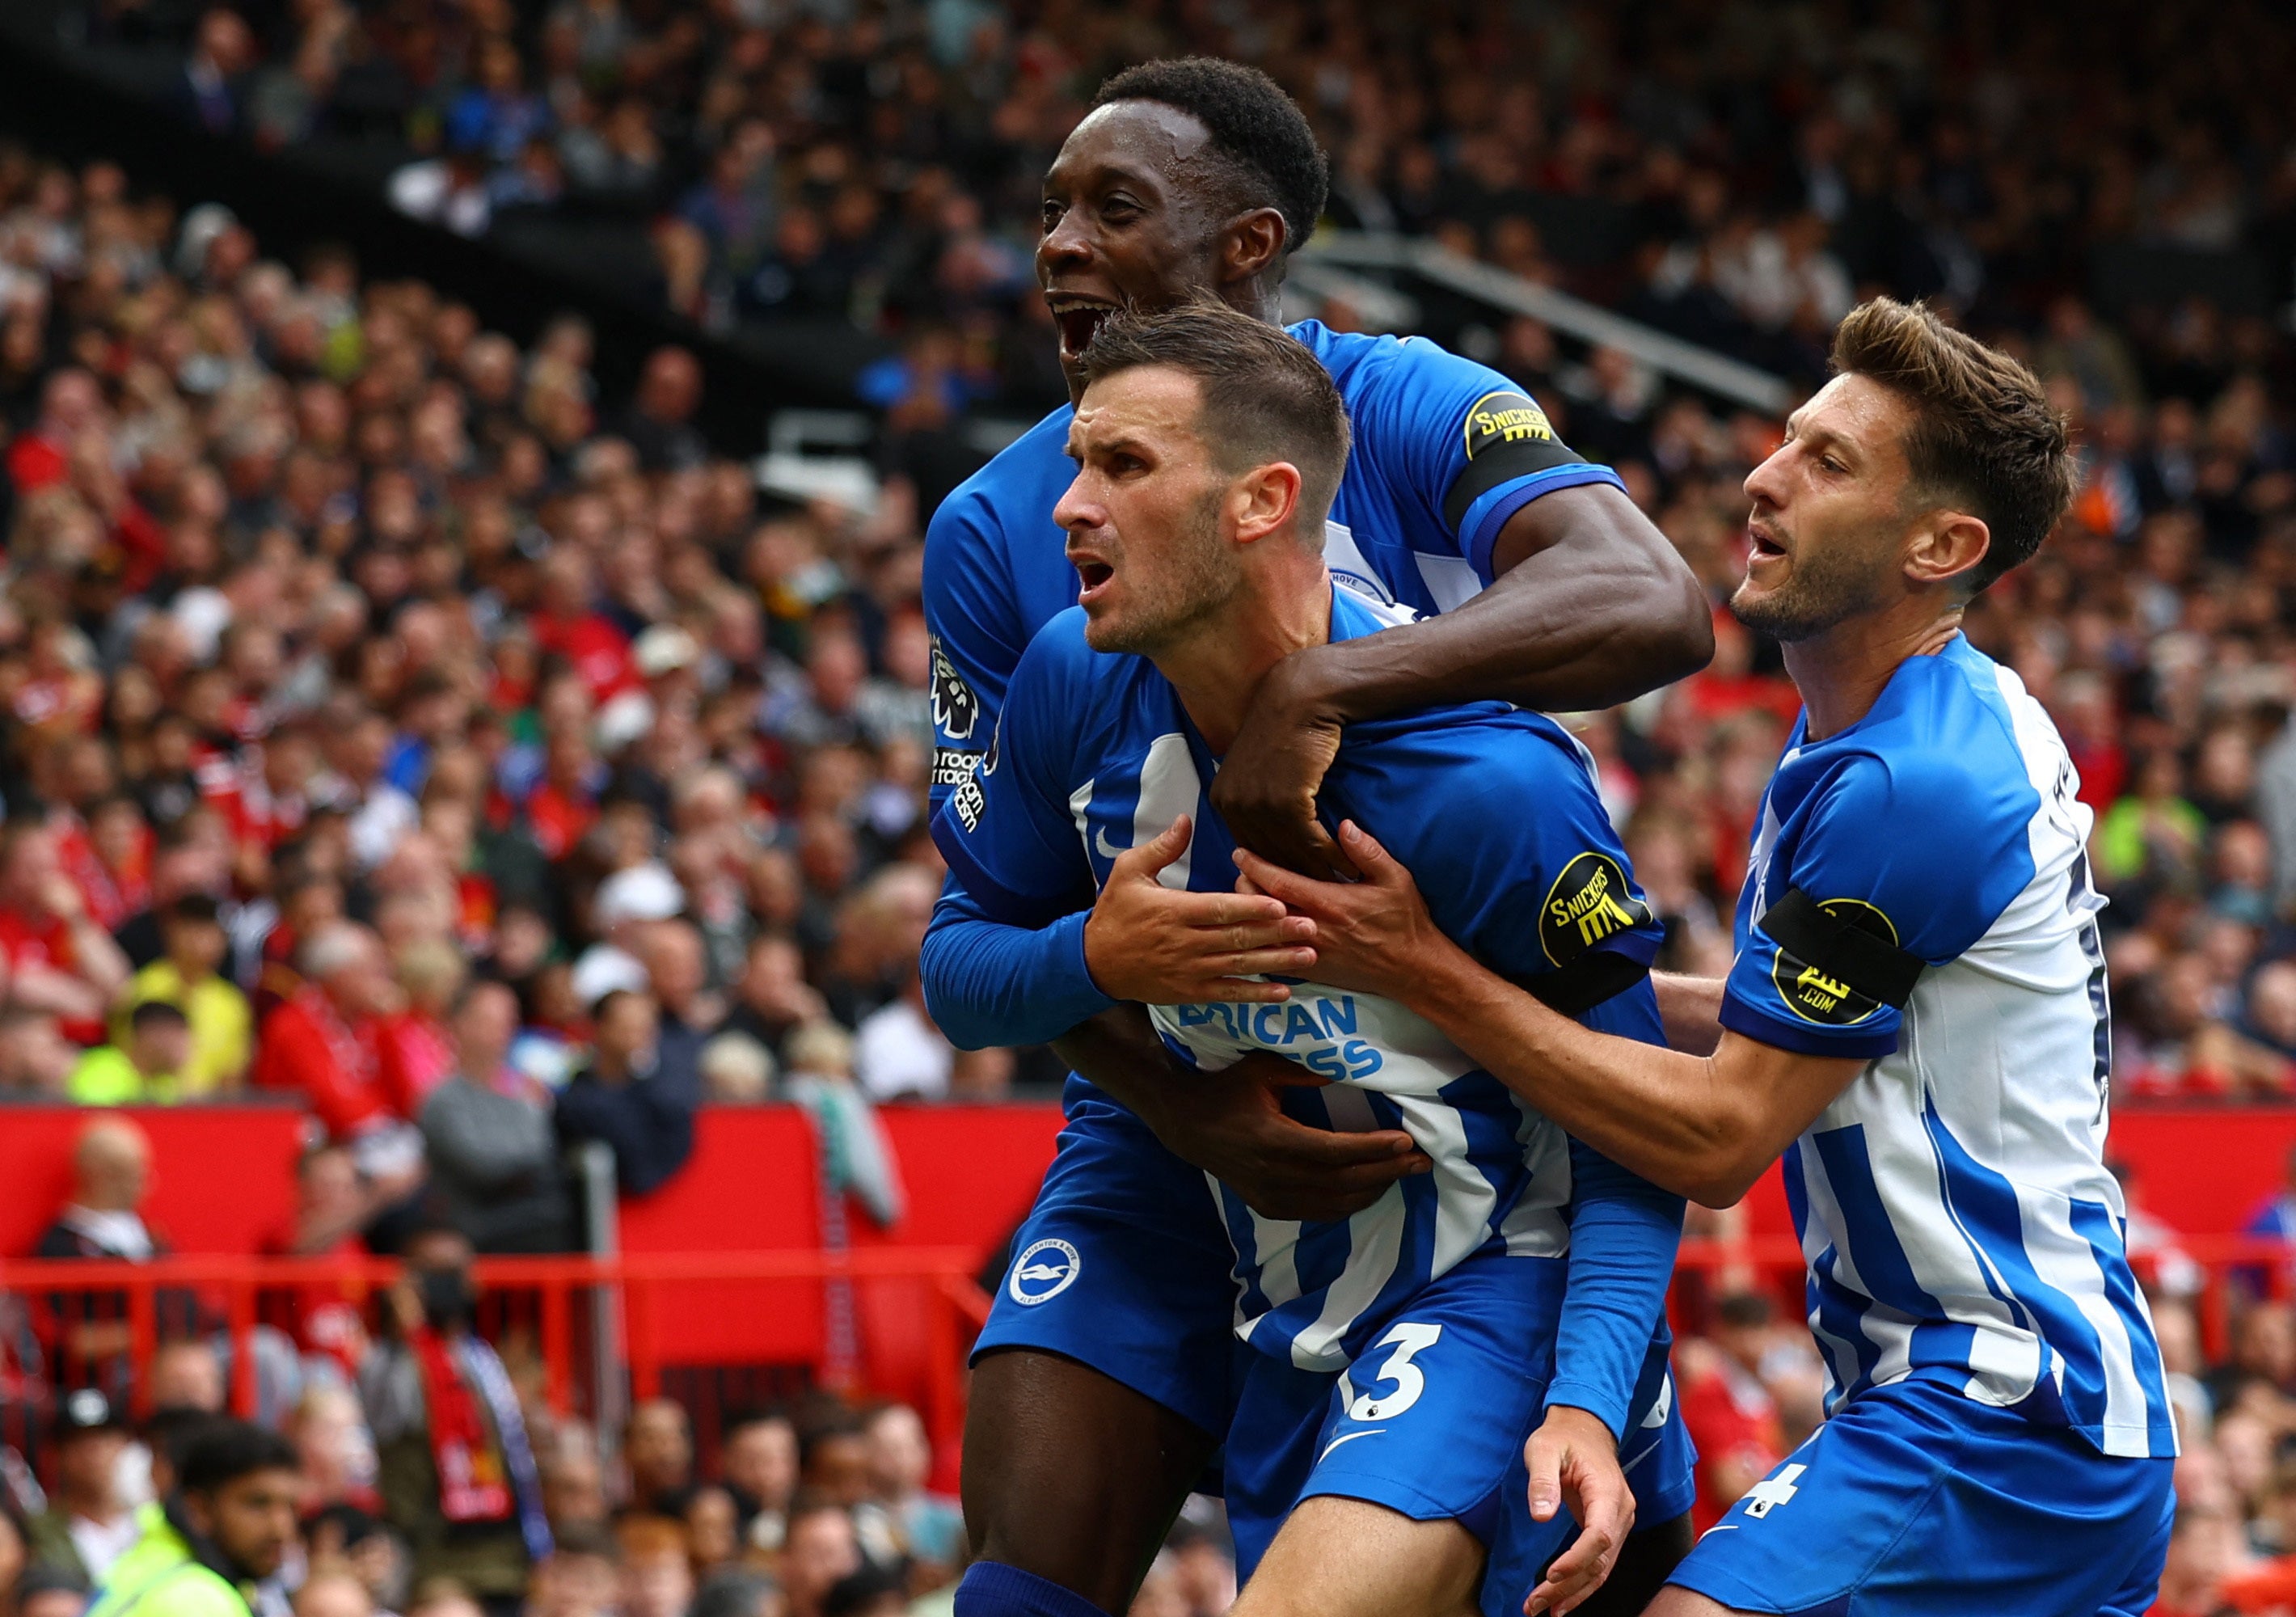 Danny Welbeck, Pascal Gross and Joao Pedro scored as Brighton defeated Man Utd at Old Trafford